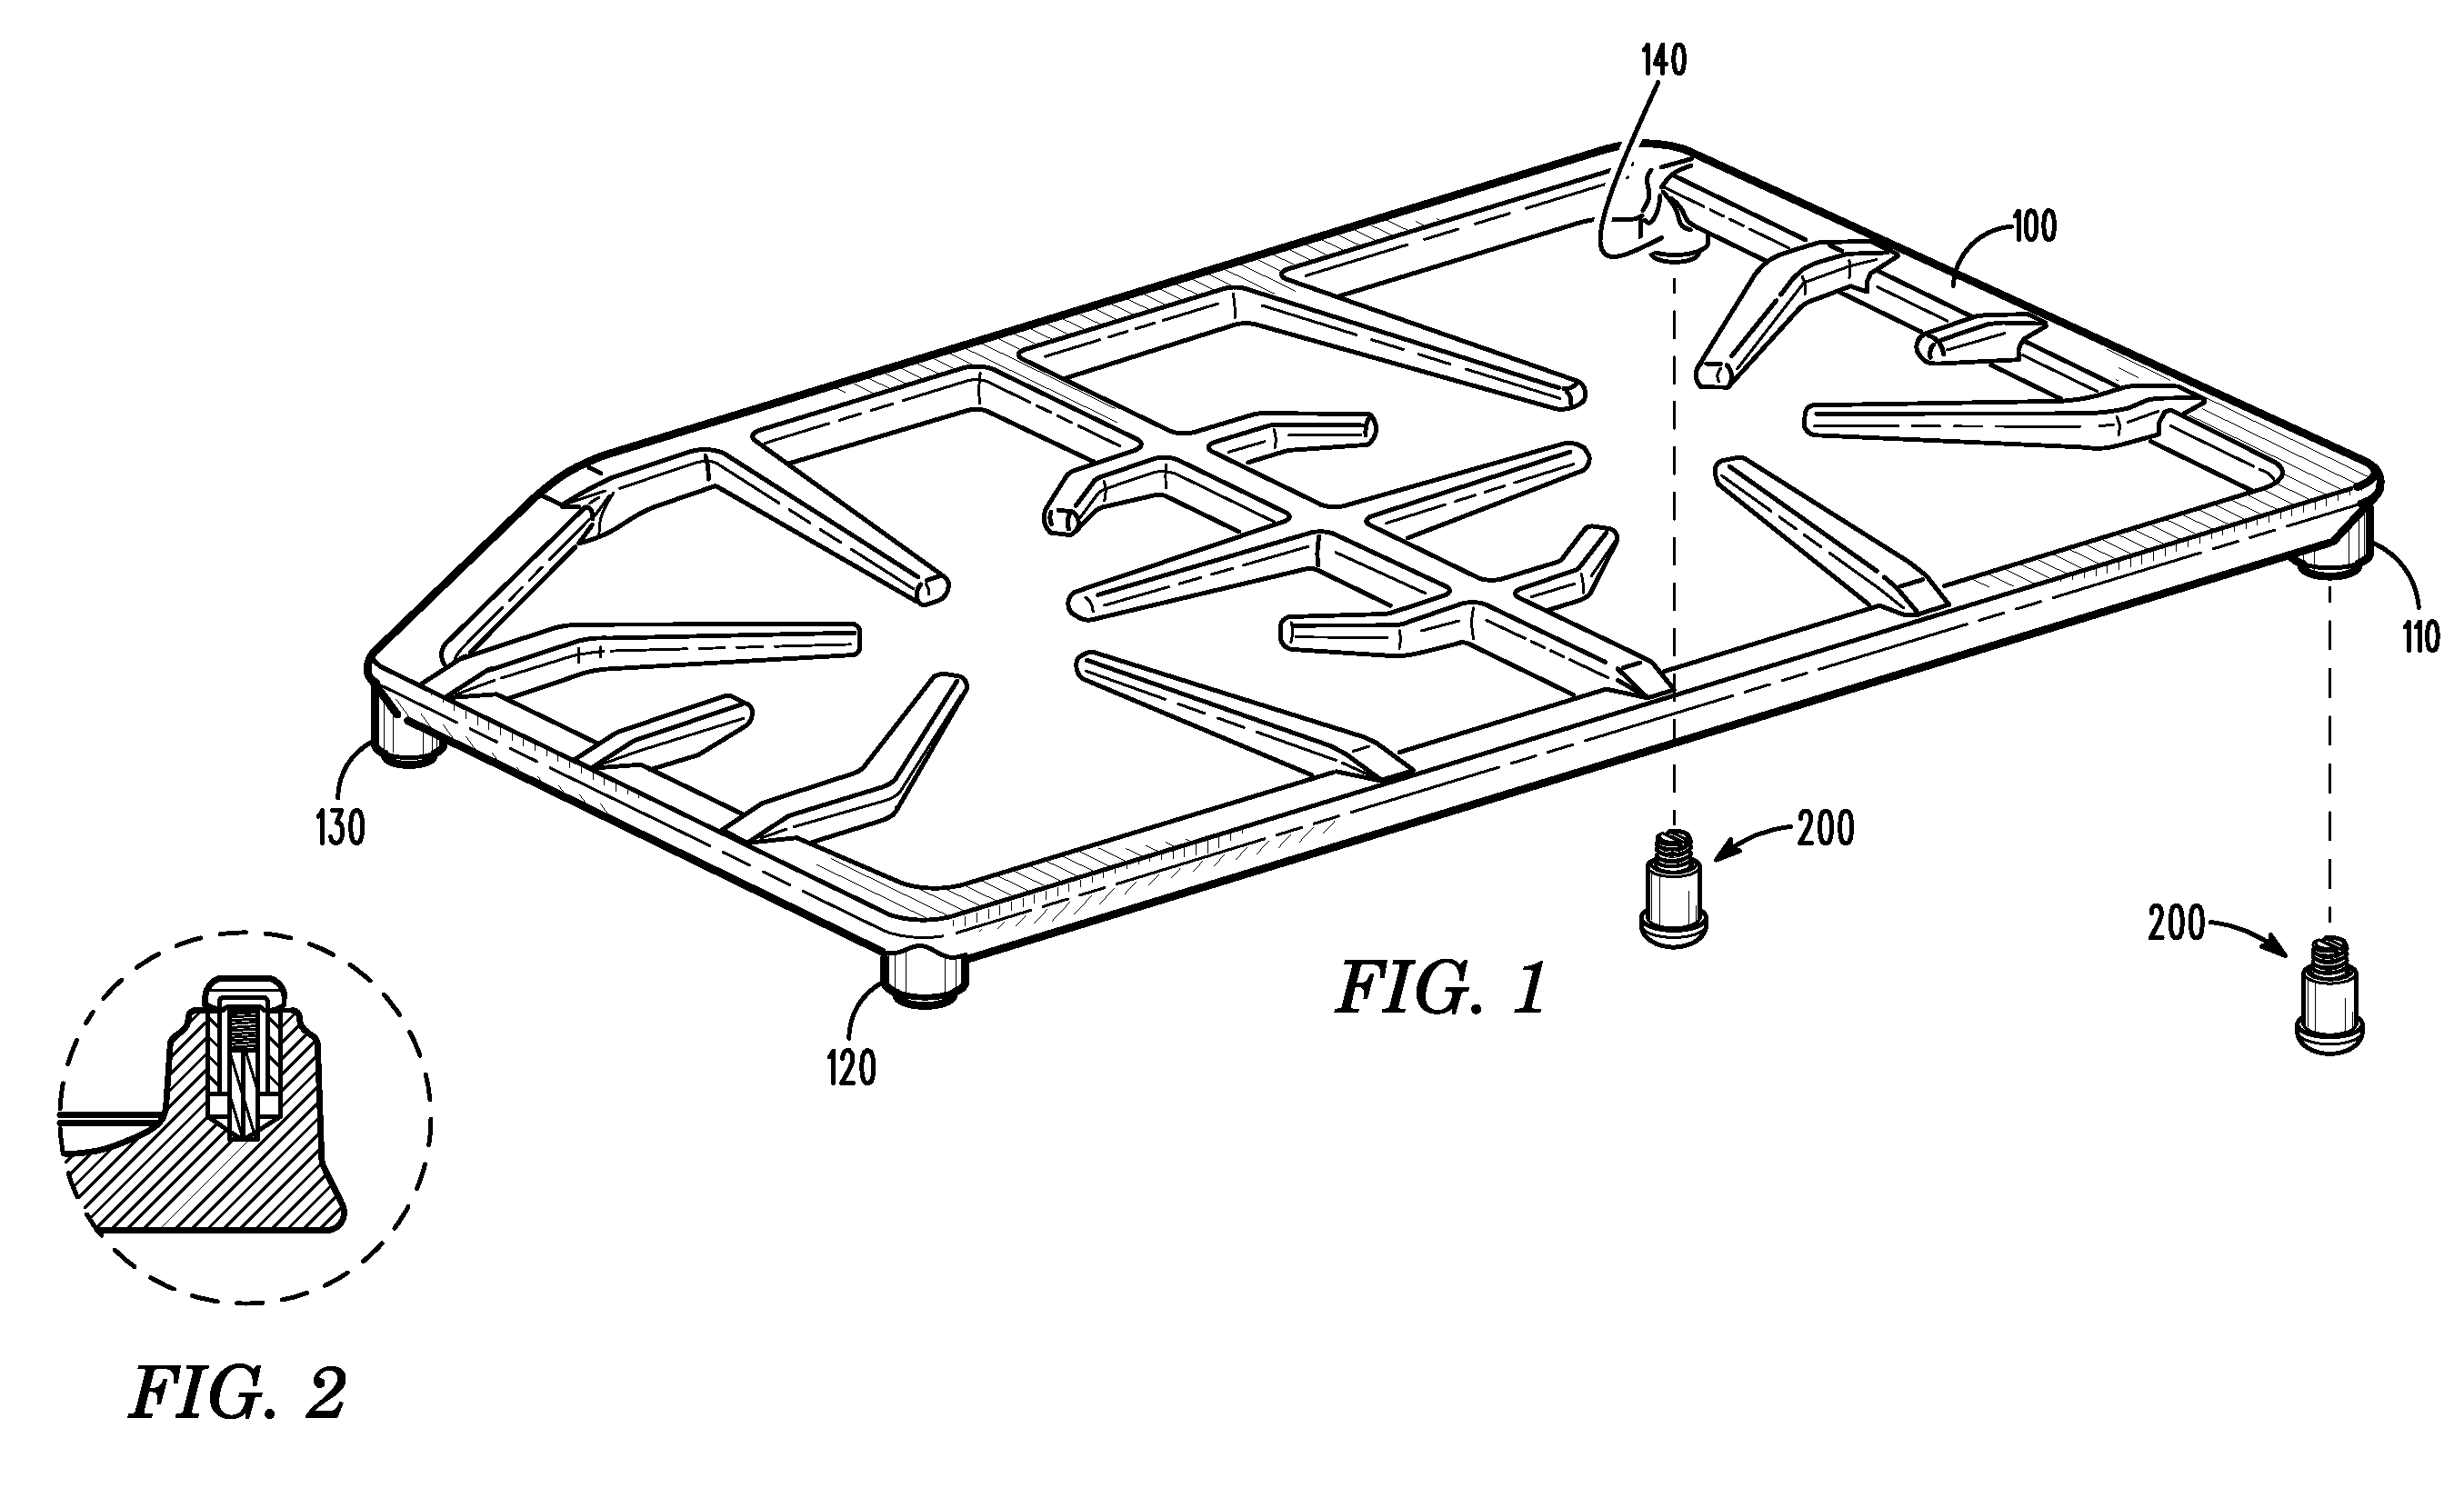 Adjustable grate foot for home appliance